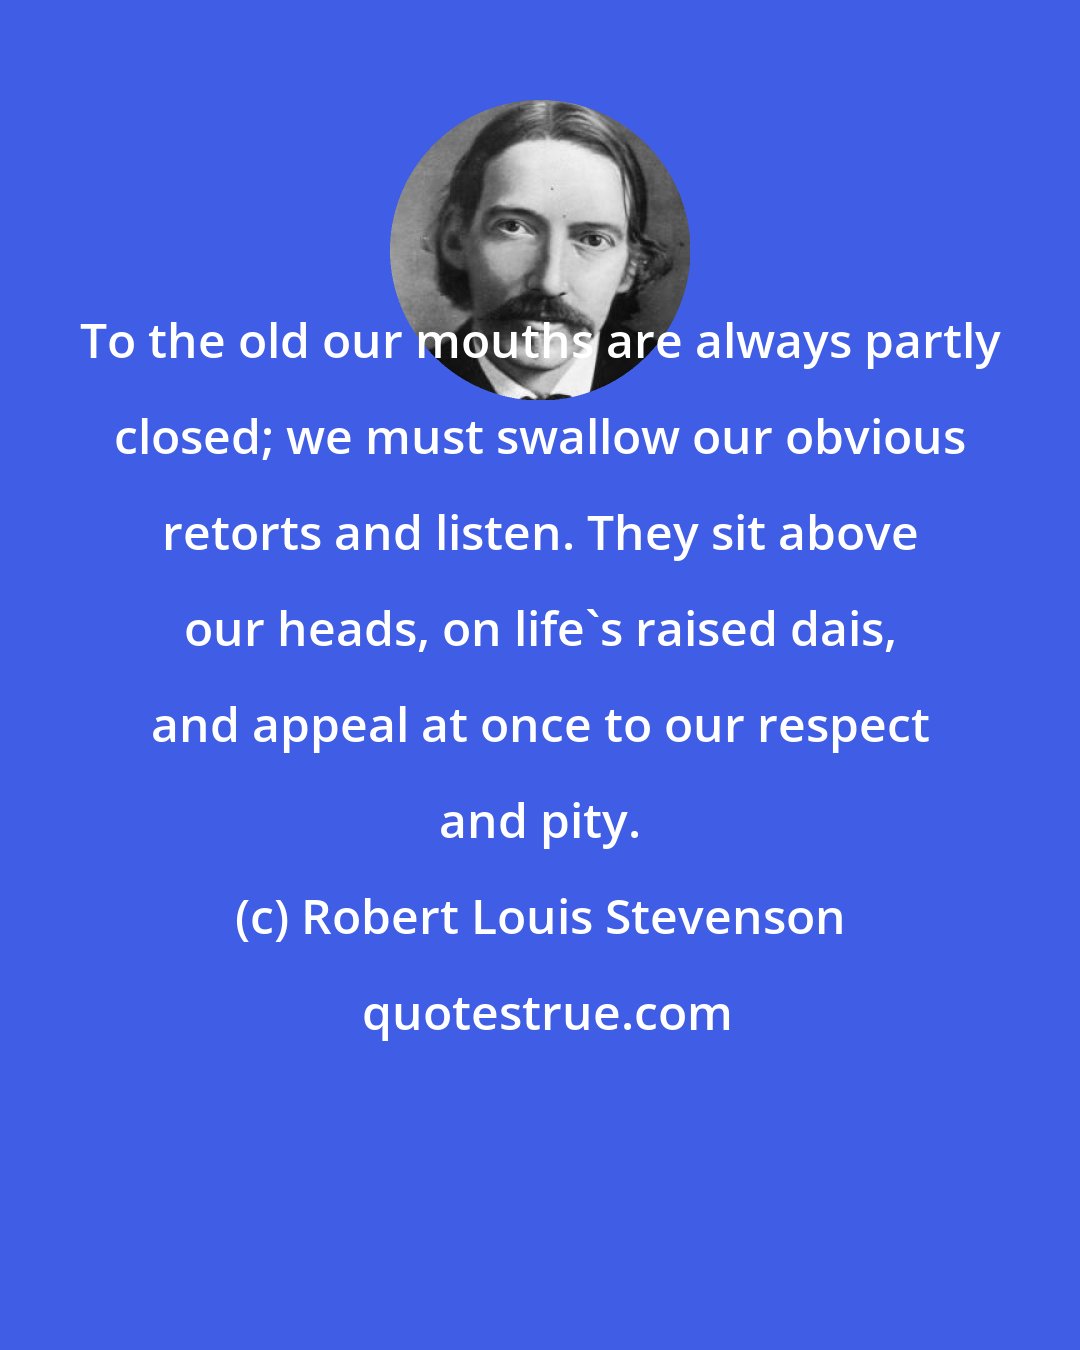 Robert Louis Stevenson: To the old our mouths are always partly closed; we must swallow our obvious retorts and listen. They sit above our heads, on life's raised dais, and appeal at once to our respect and pity.